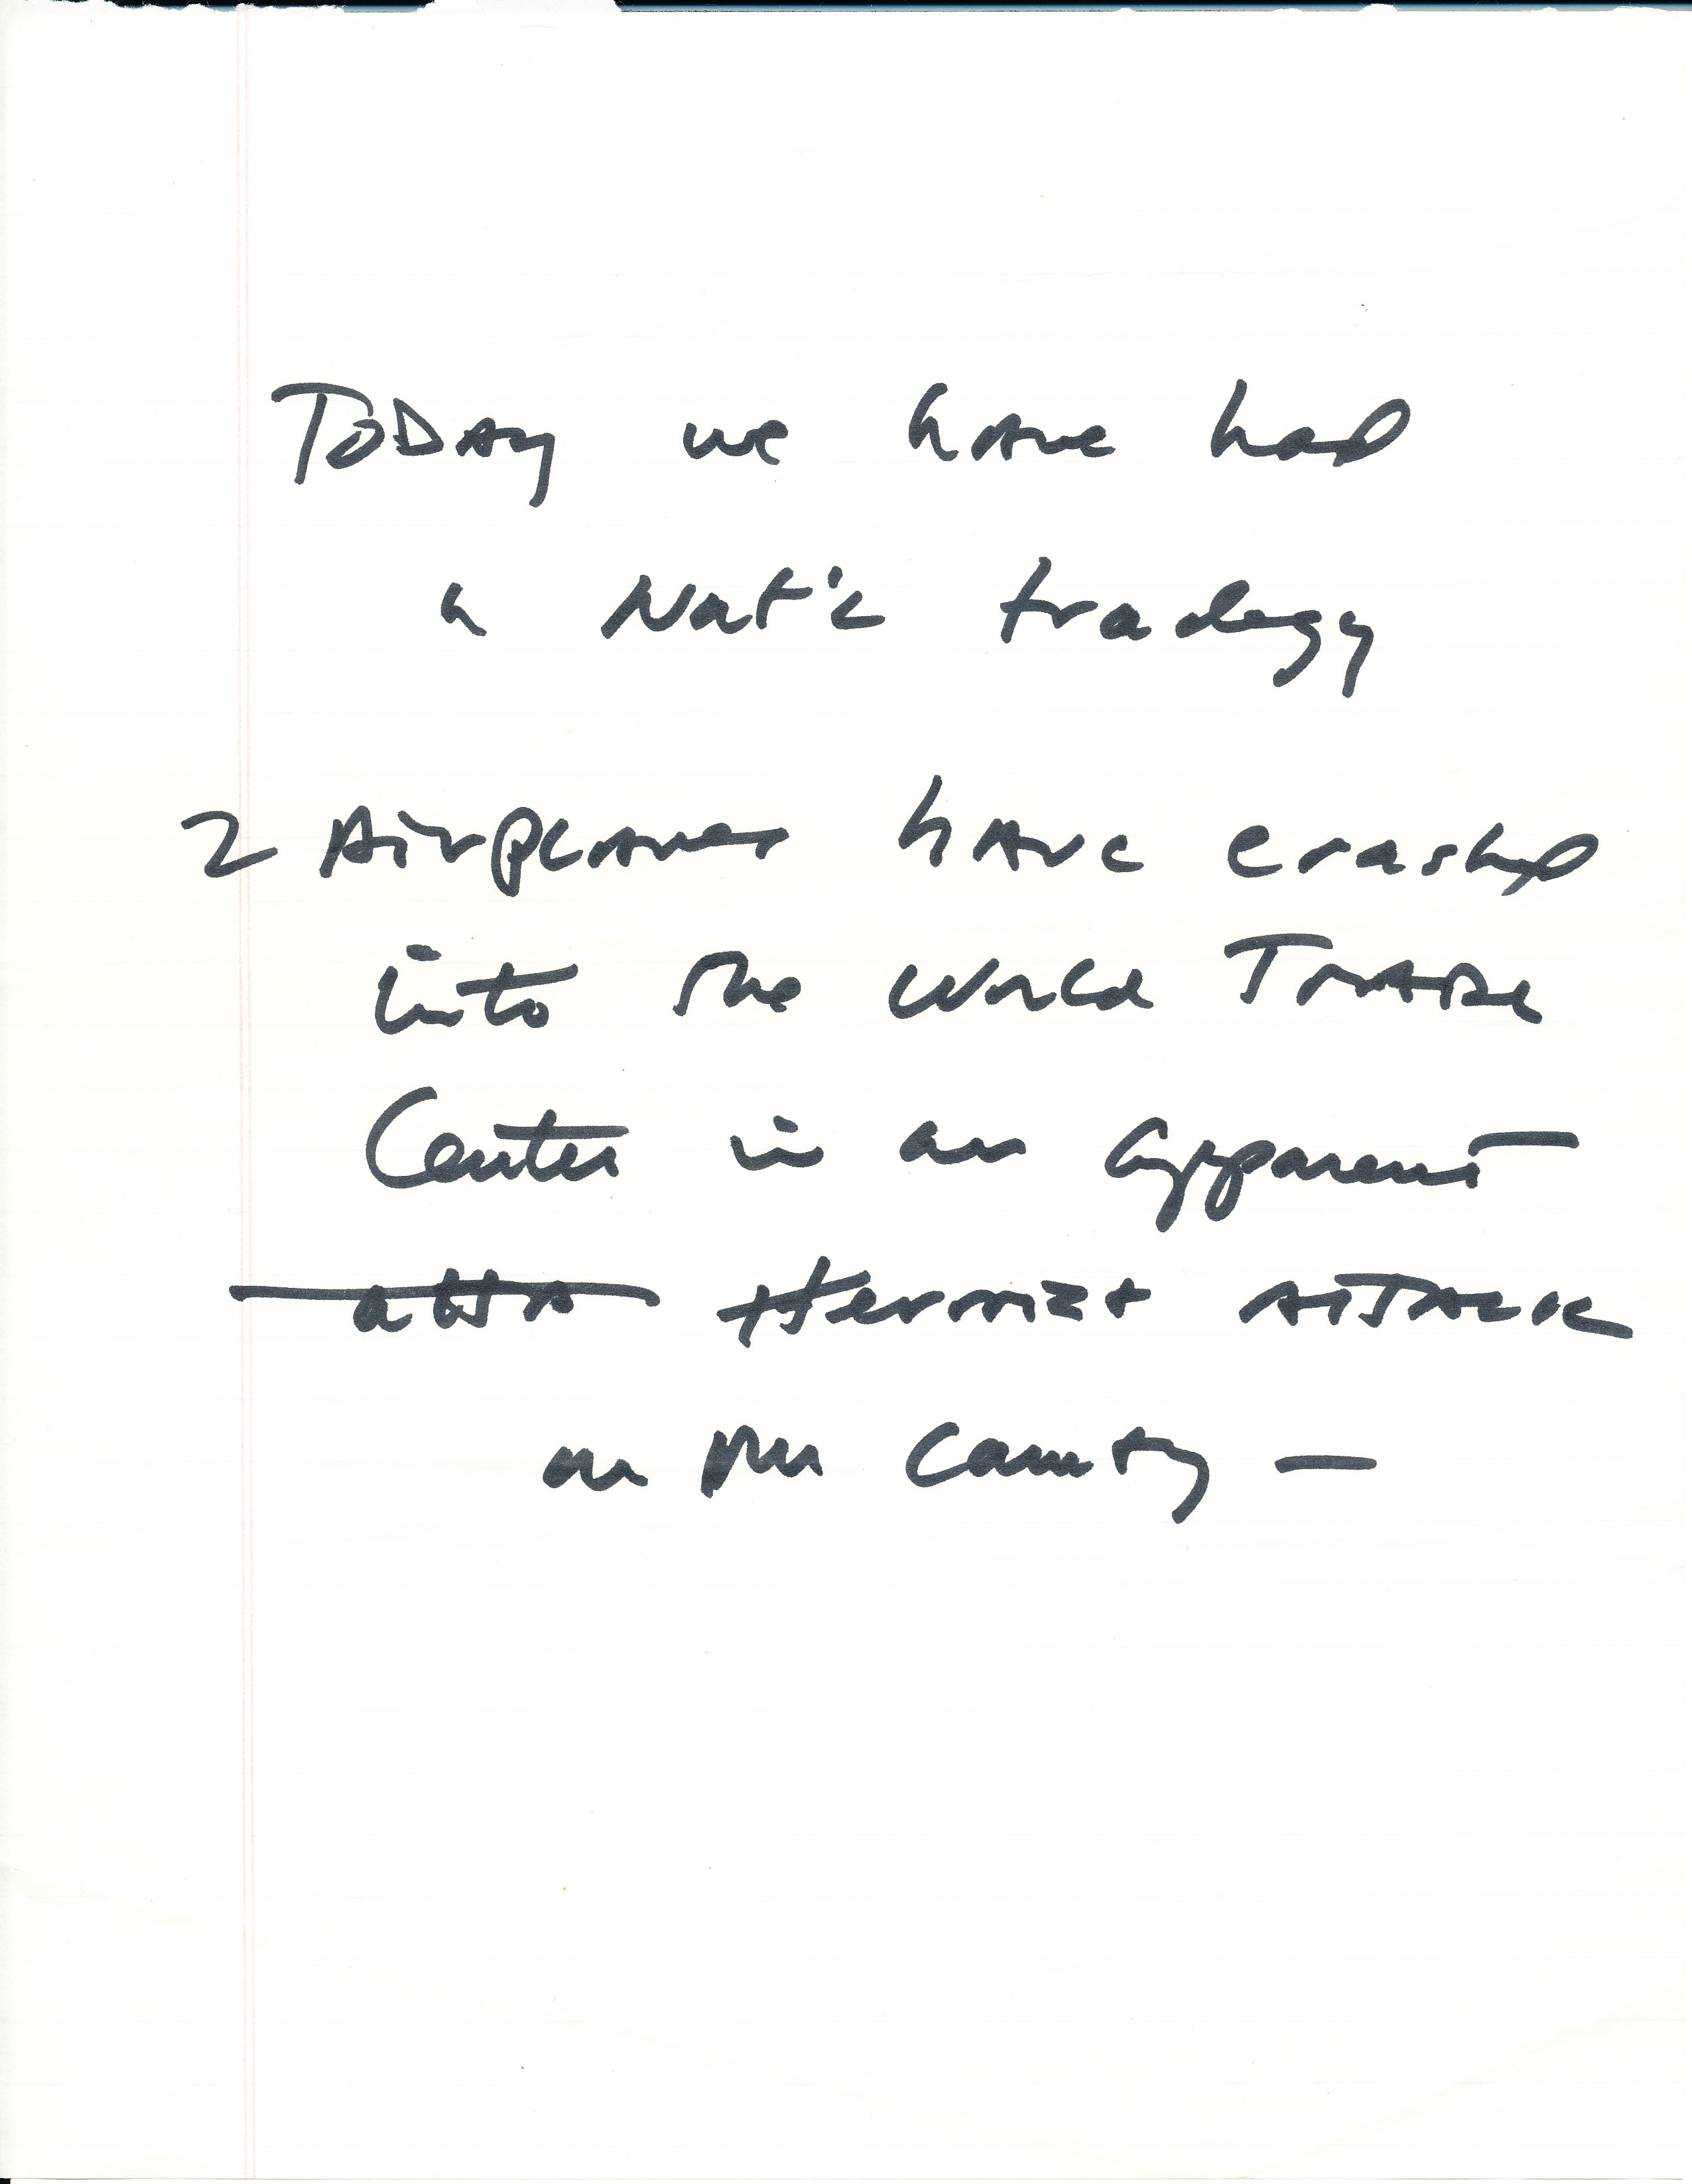 Handwritten notes by President George W. Bush for the initial statement to the press after the terrorist attacks on September 11, 2001. (Page 1 of 3)